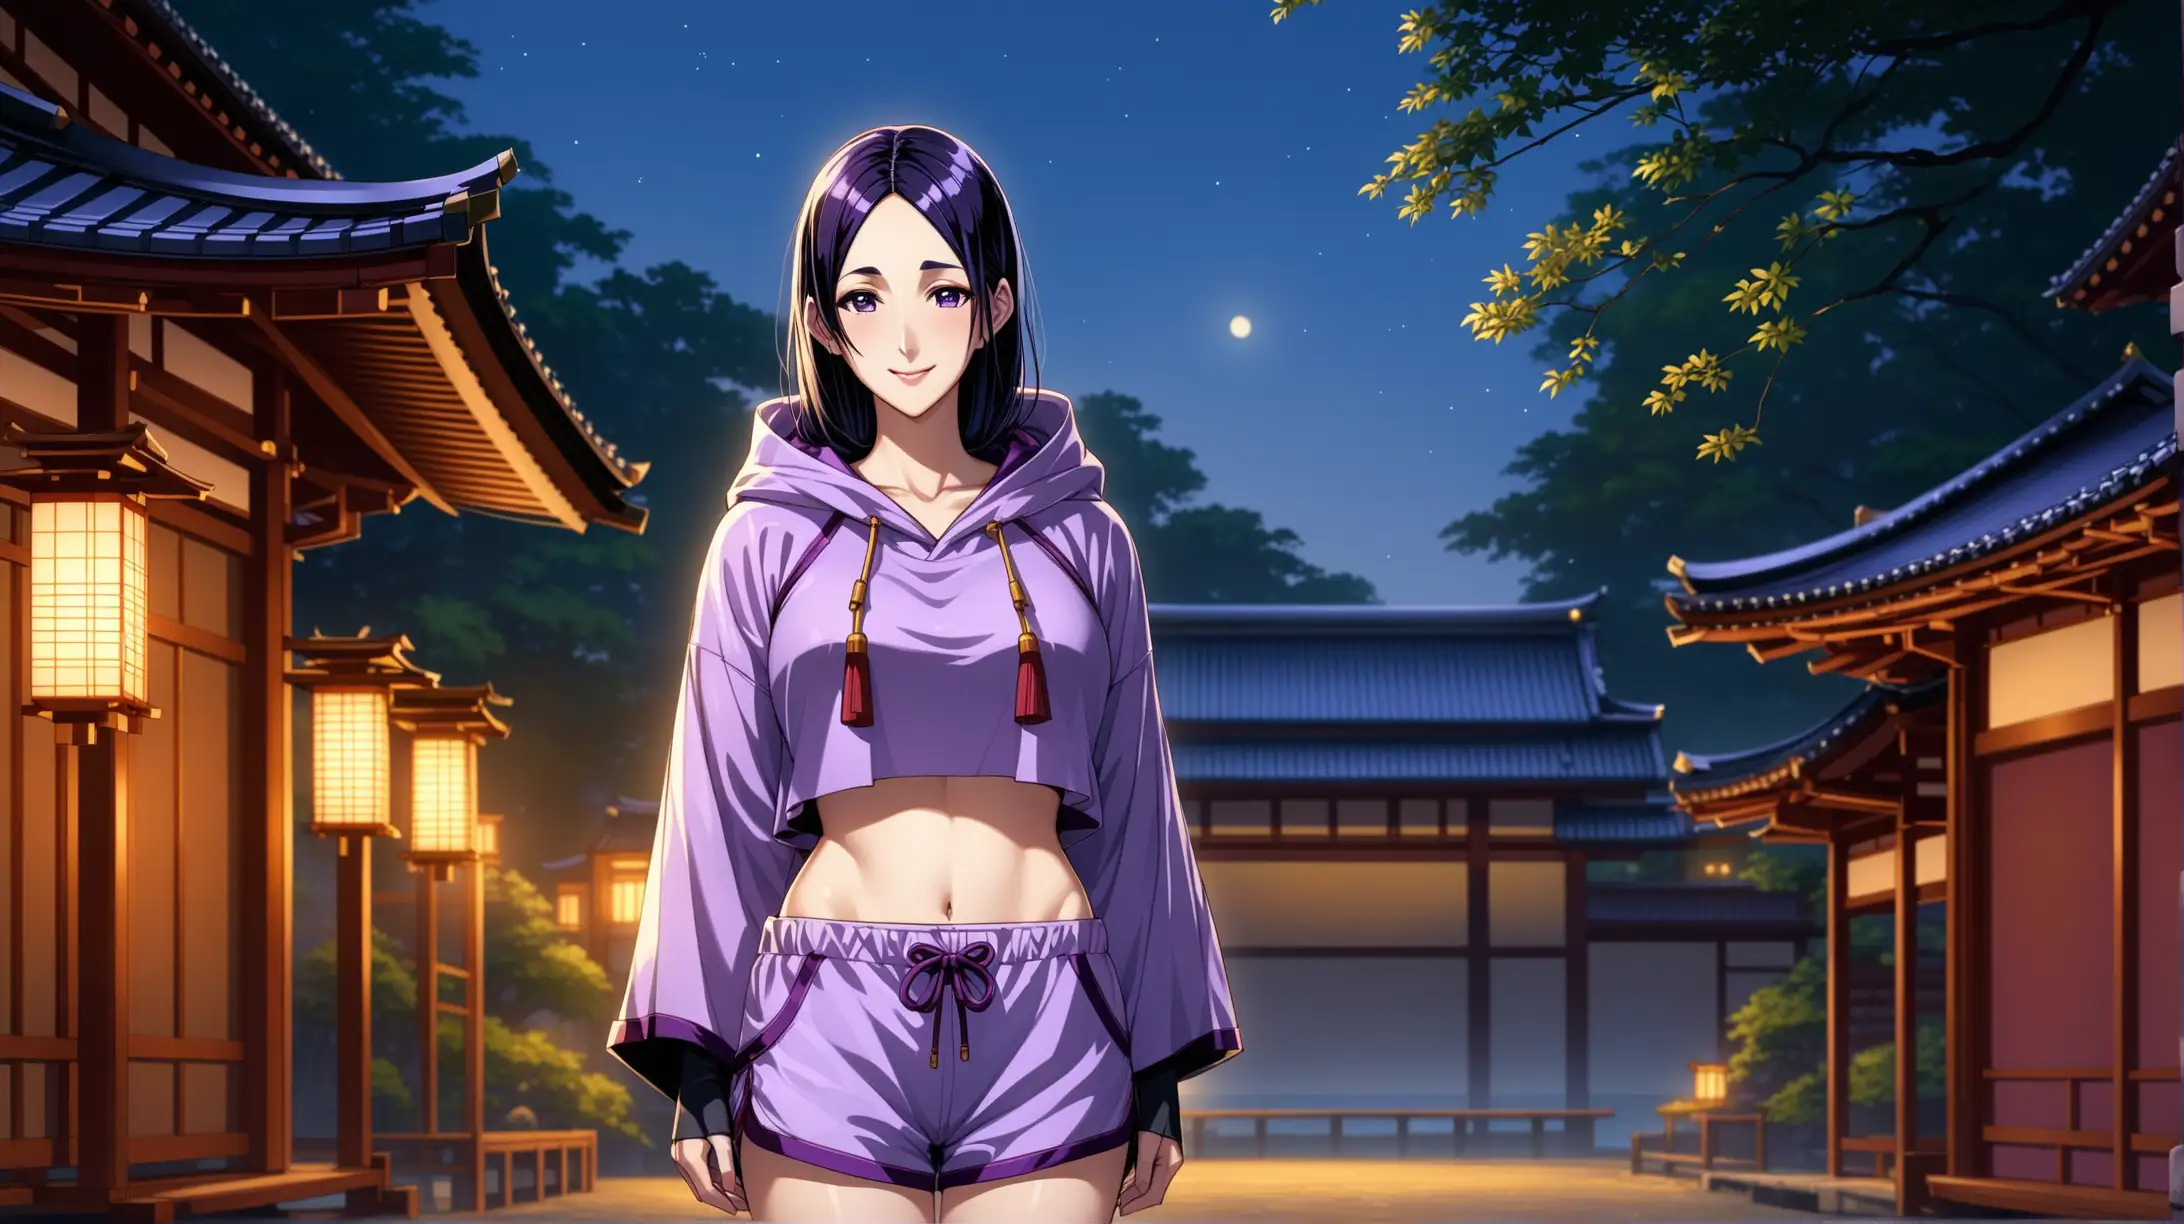 Draw the character Minamoto no Raikou, high quality, dim lighting, long shot, outdoors, standing, relaxed pose, shorts and a hooded jacket showing midriff, smiling